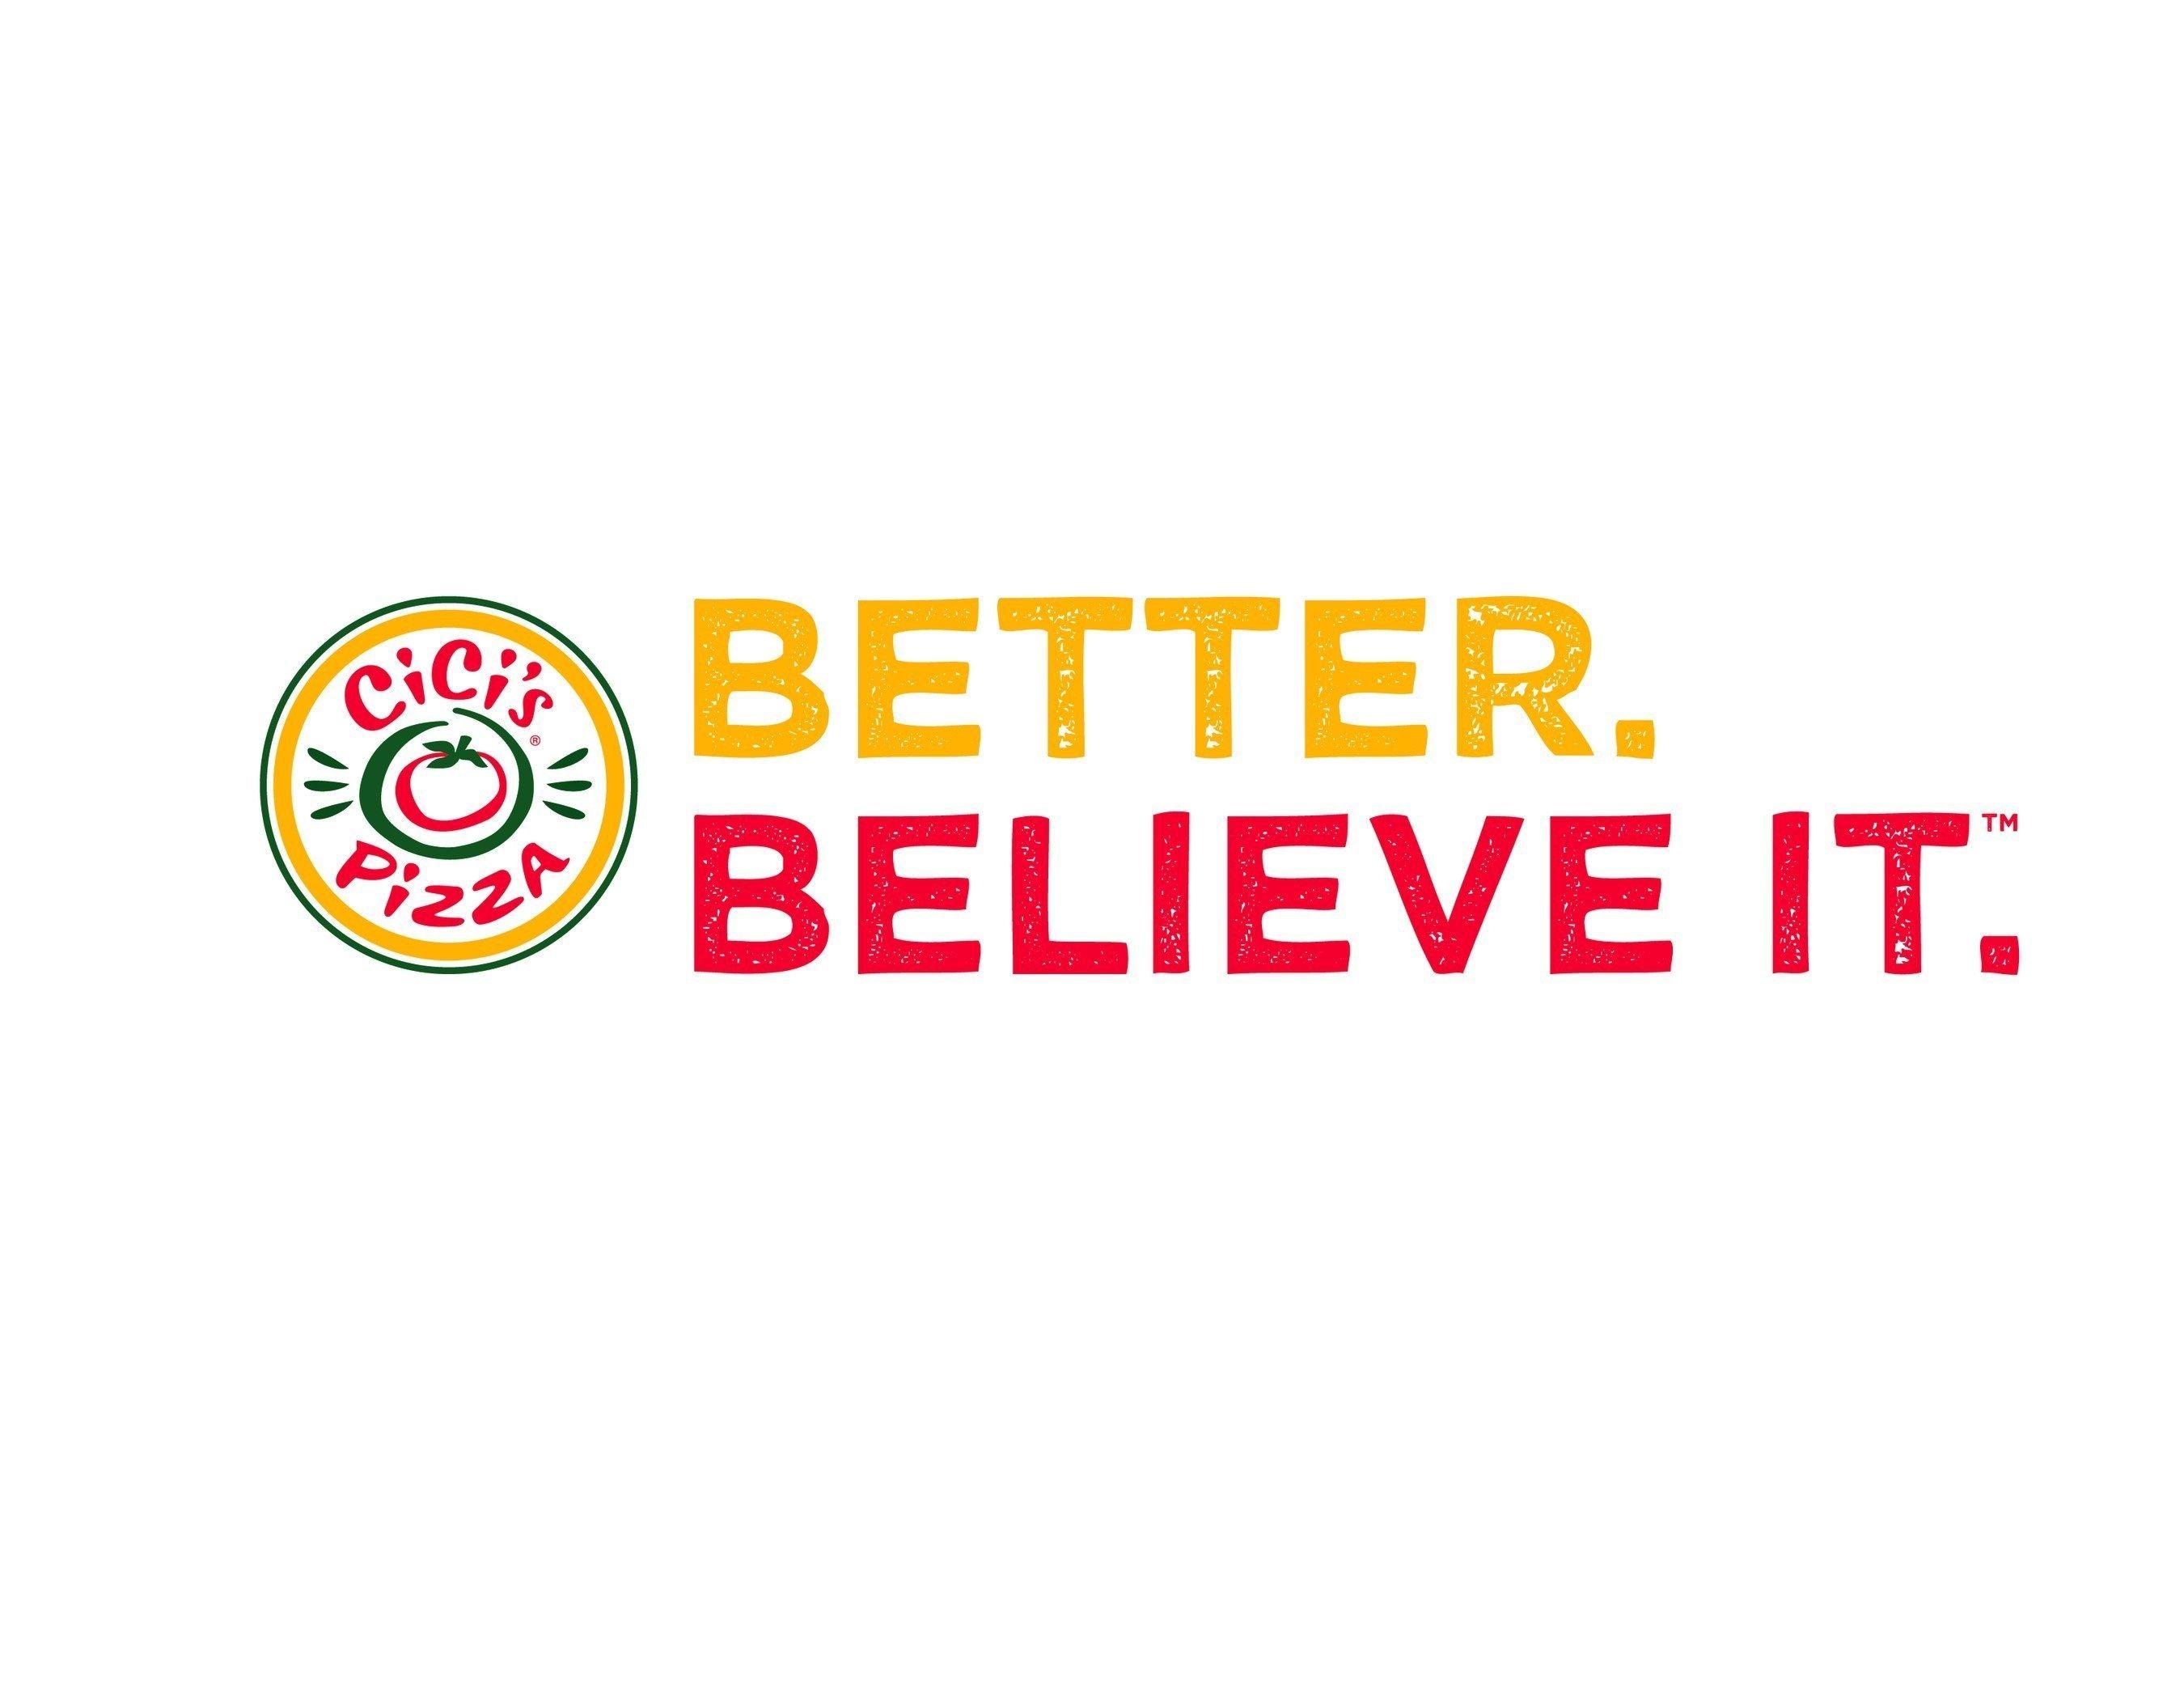 Cici's Logo - Big Changes At CiCi's Pizza? Better Believe It™!